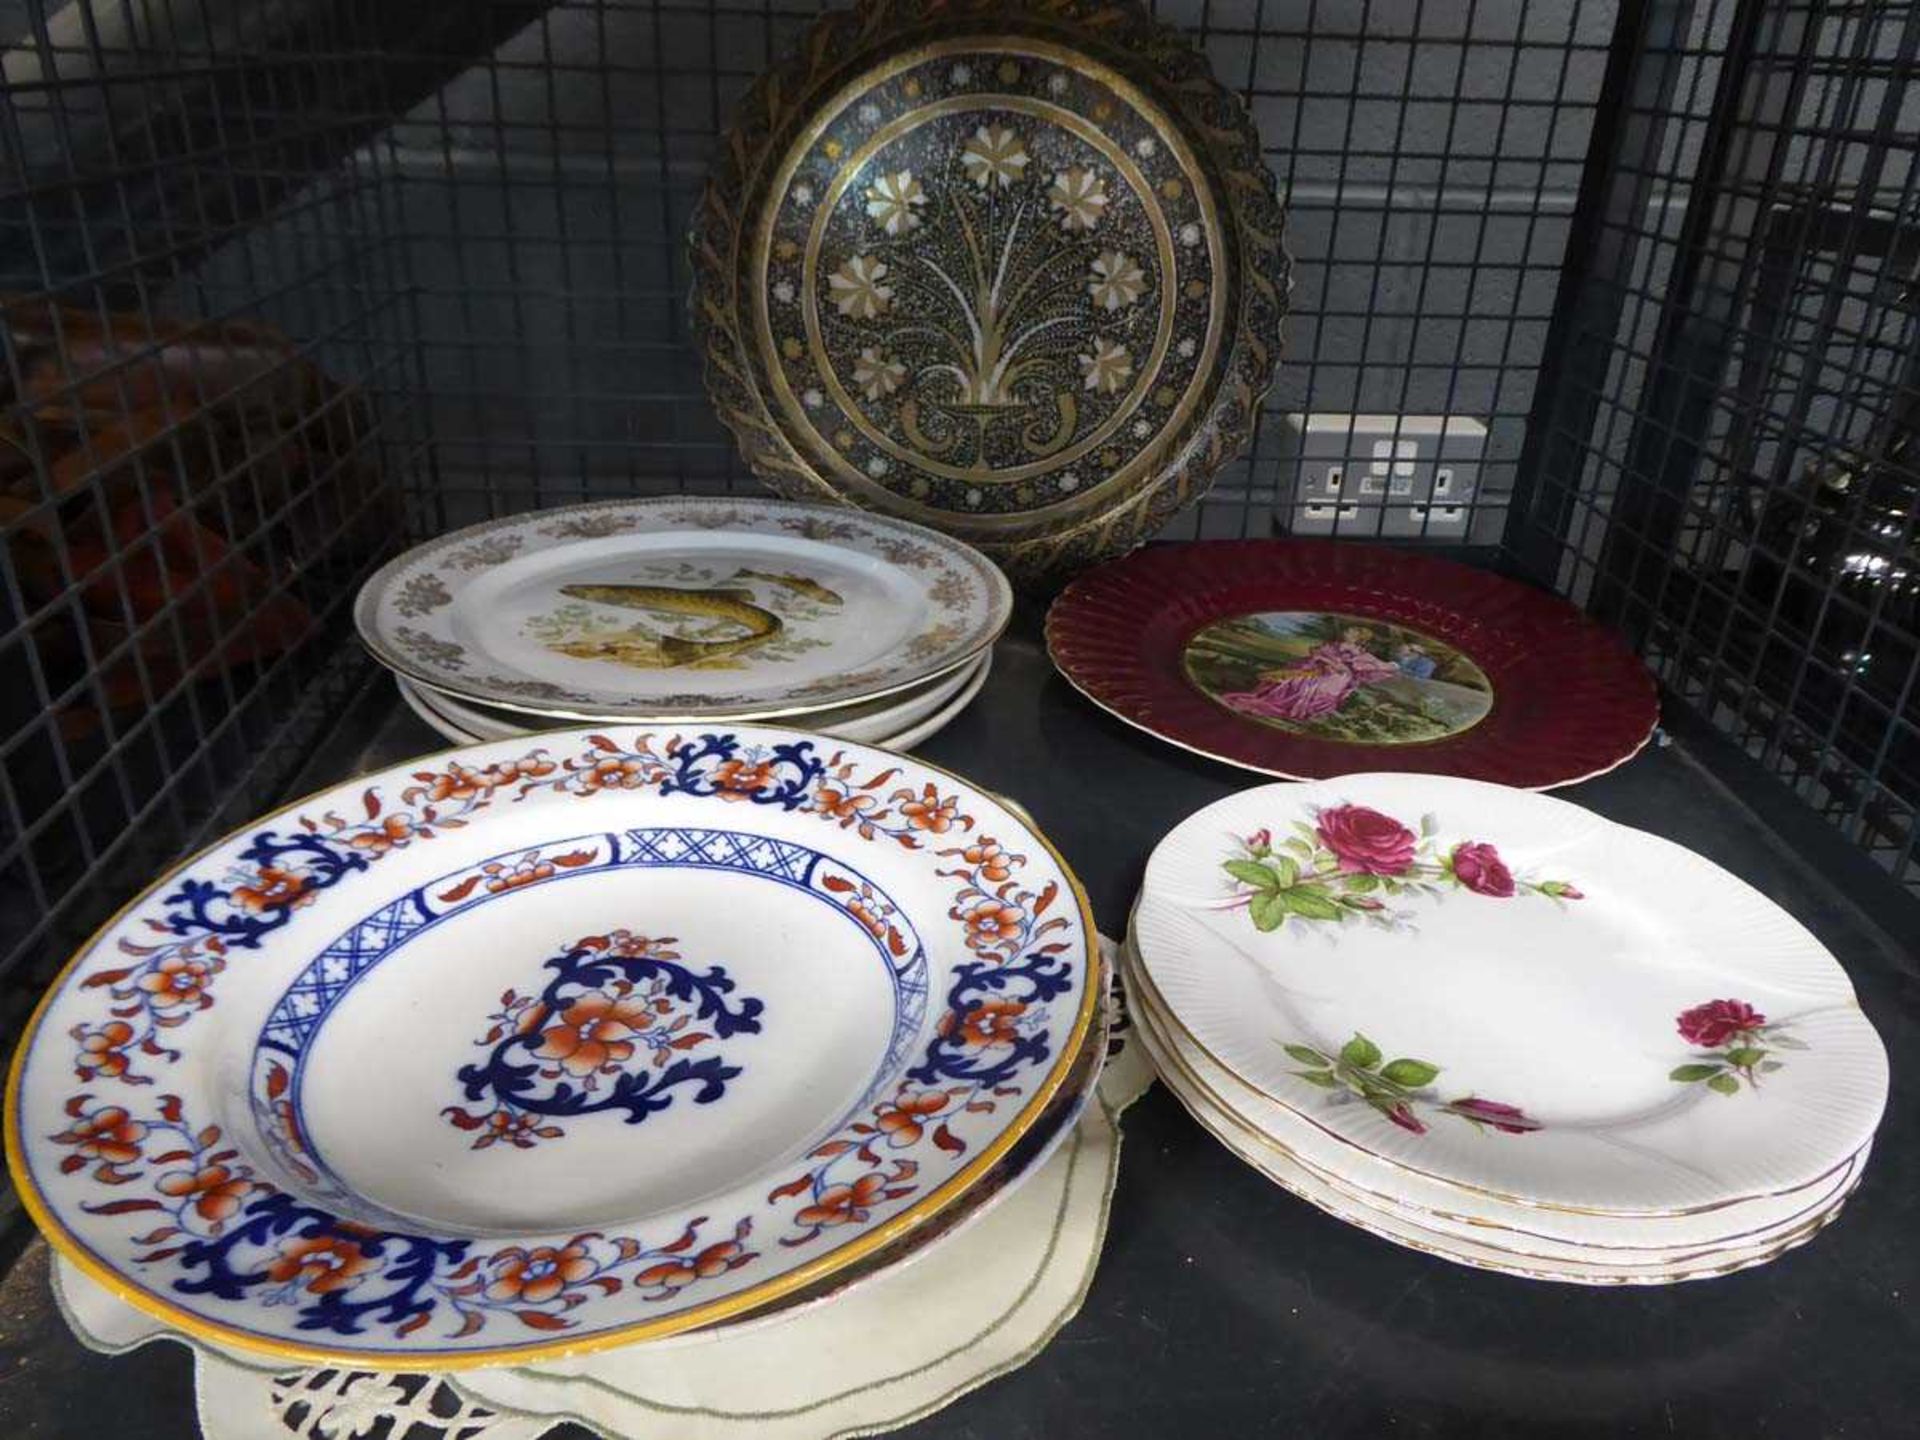 Cage containing assorted decorative plates